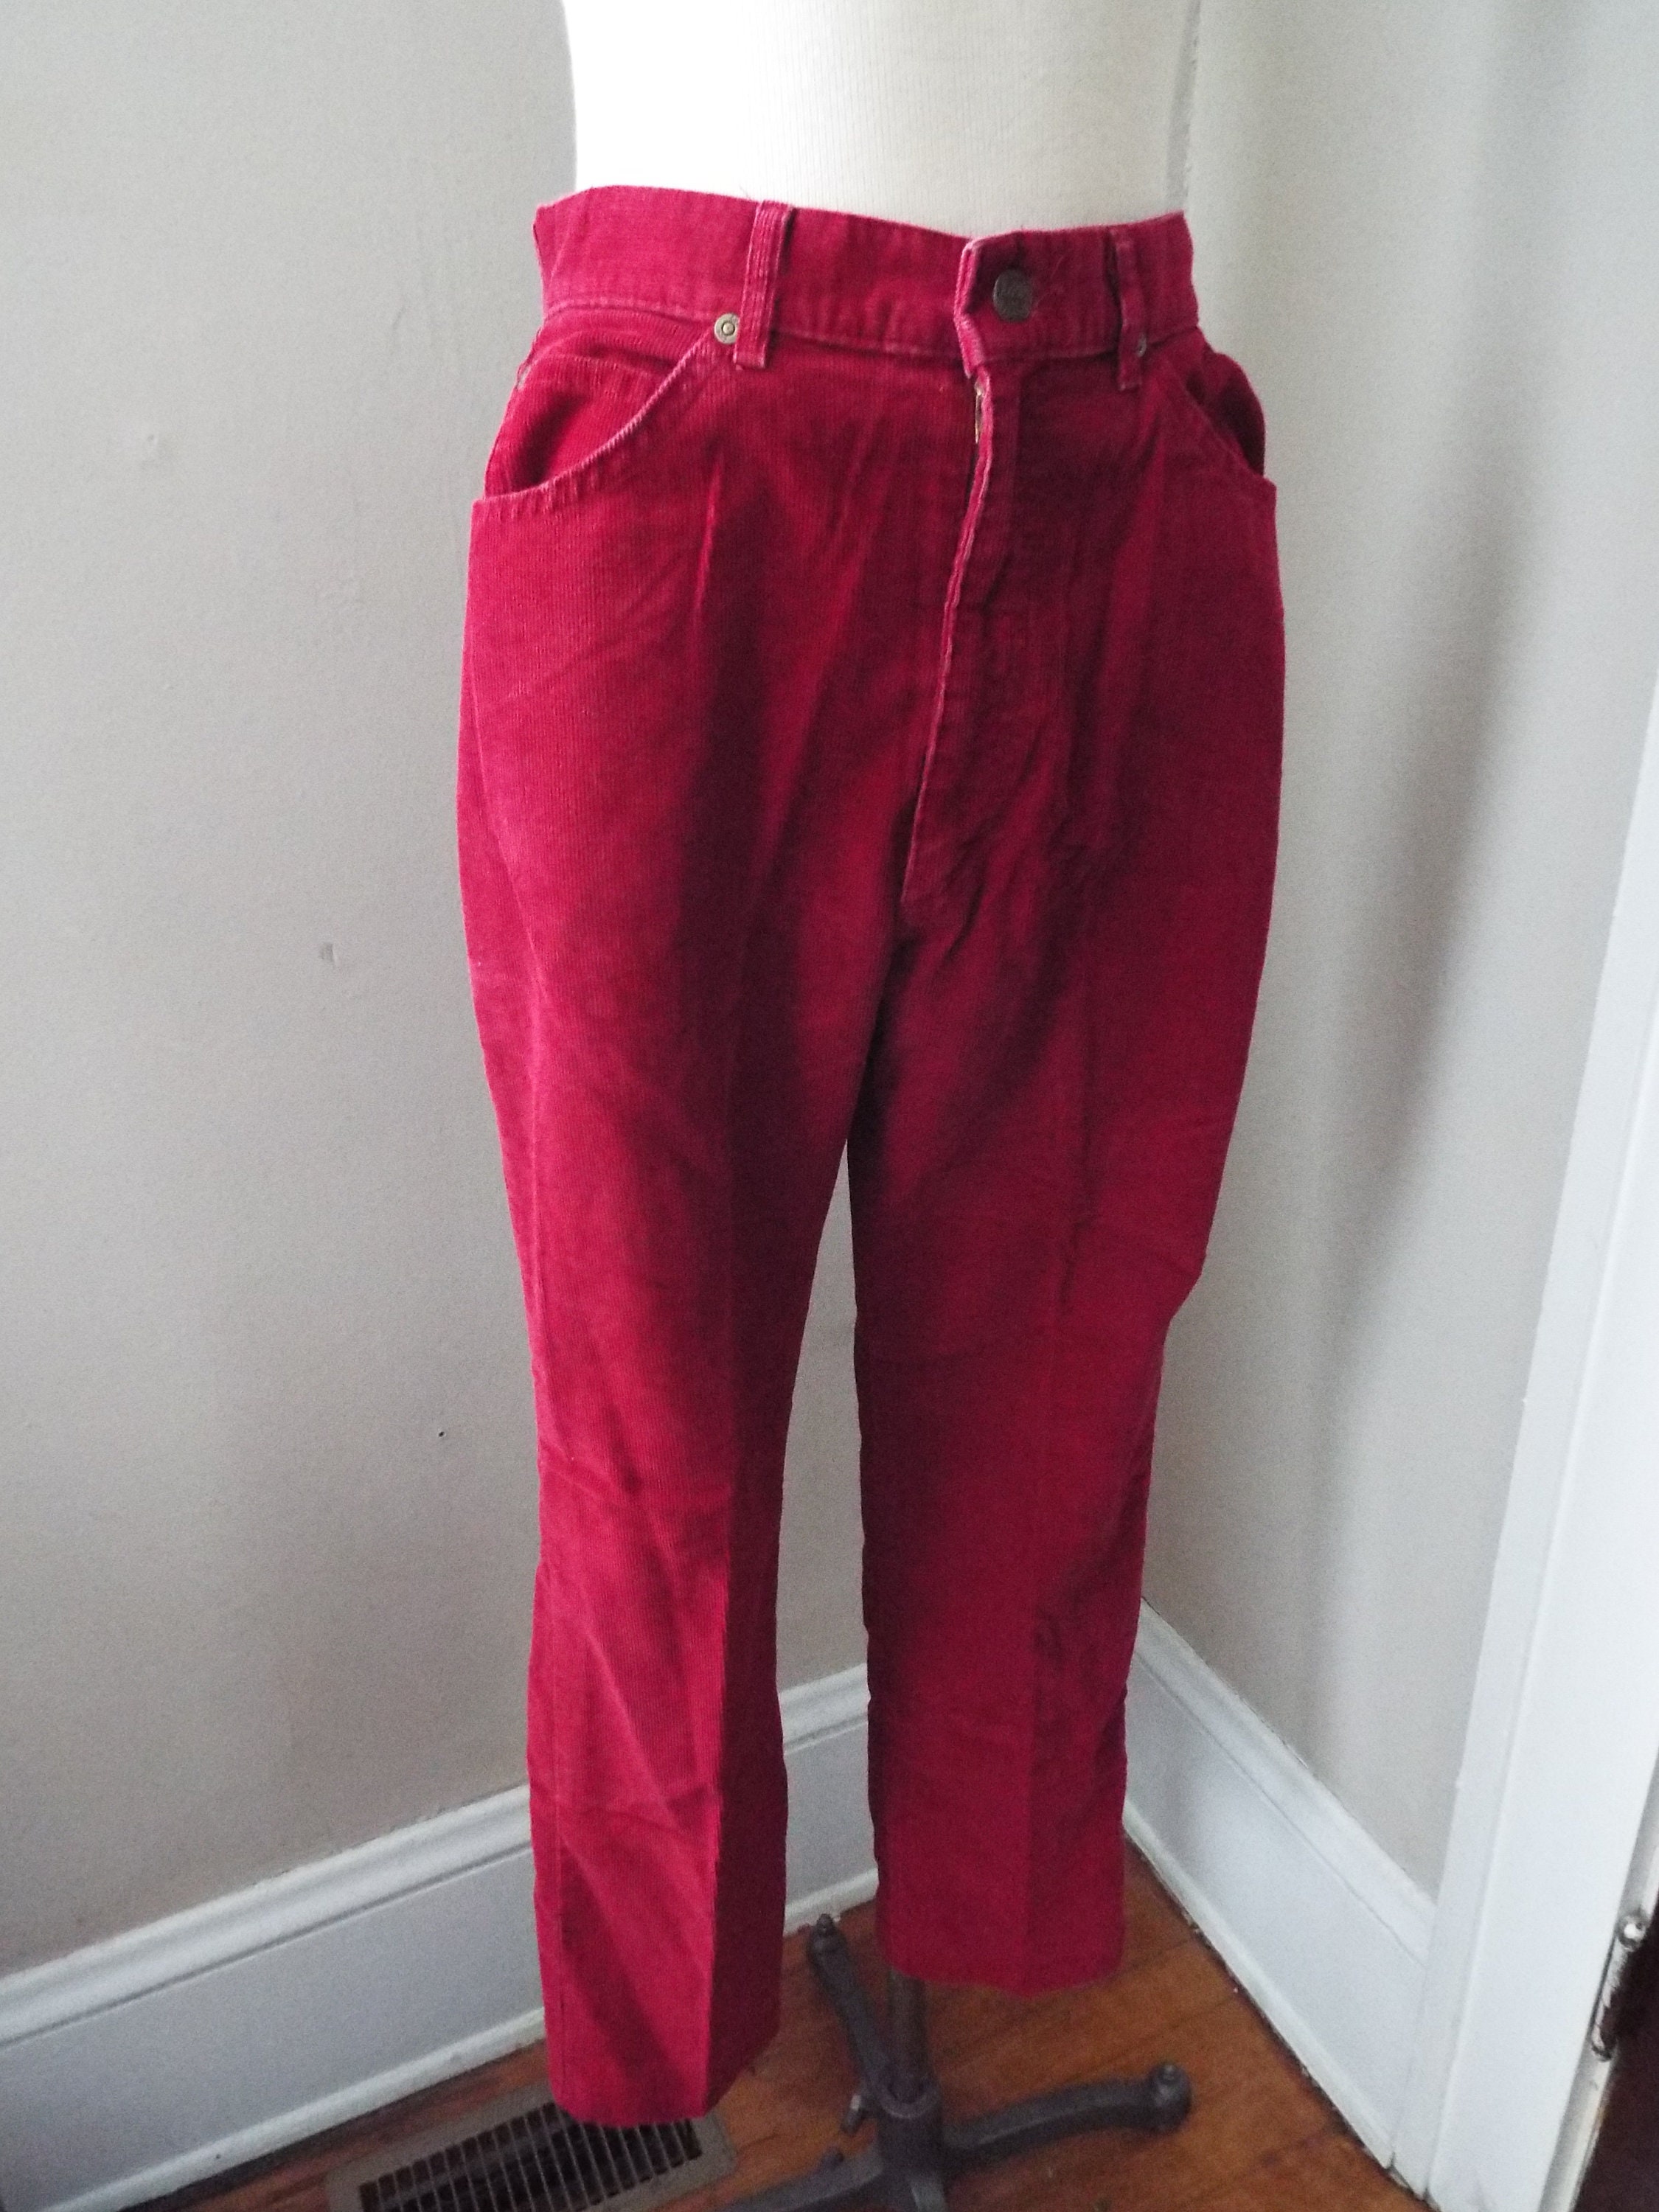 Red Hot Chili Mens Corduroy Pants Limited Edition Scarlet